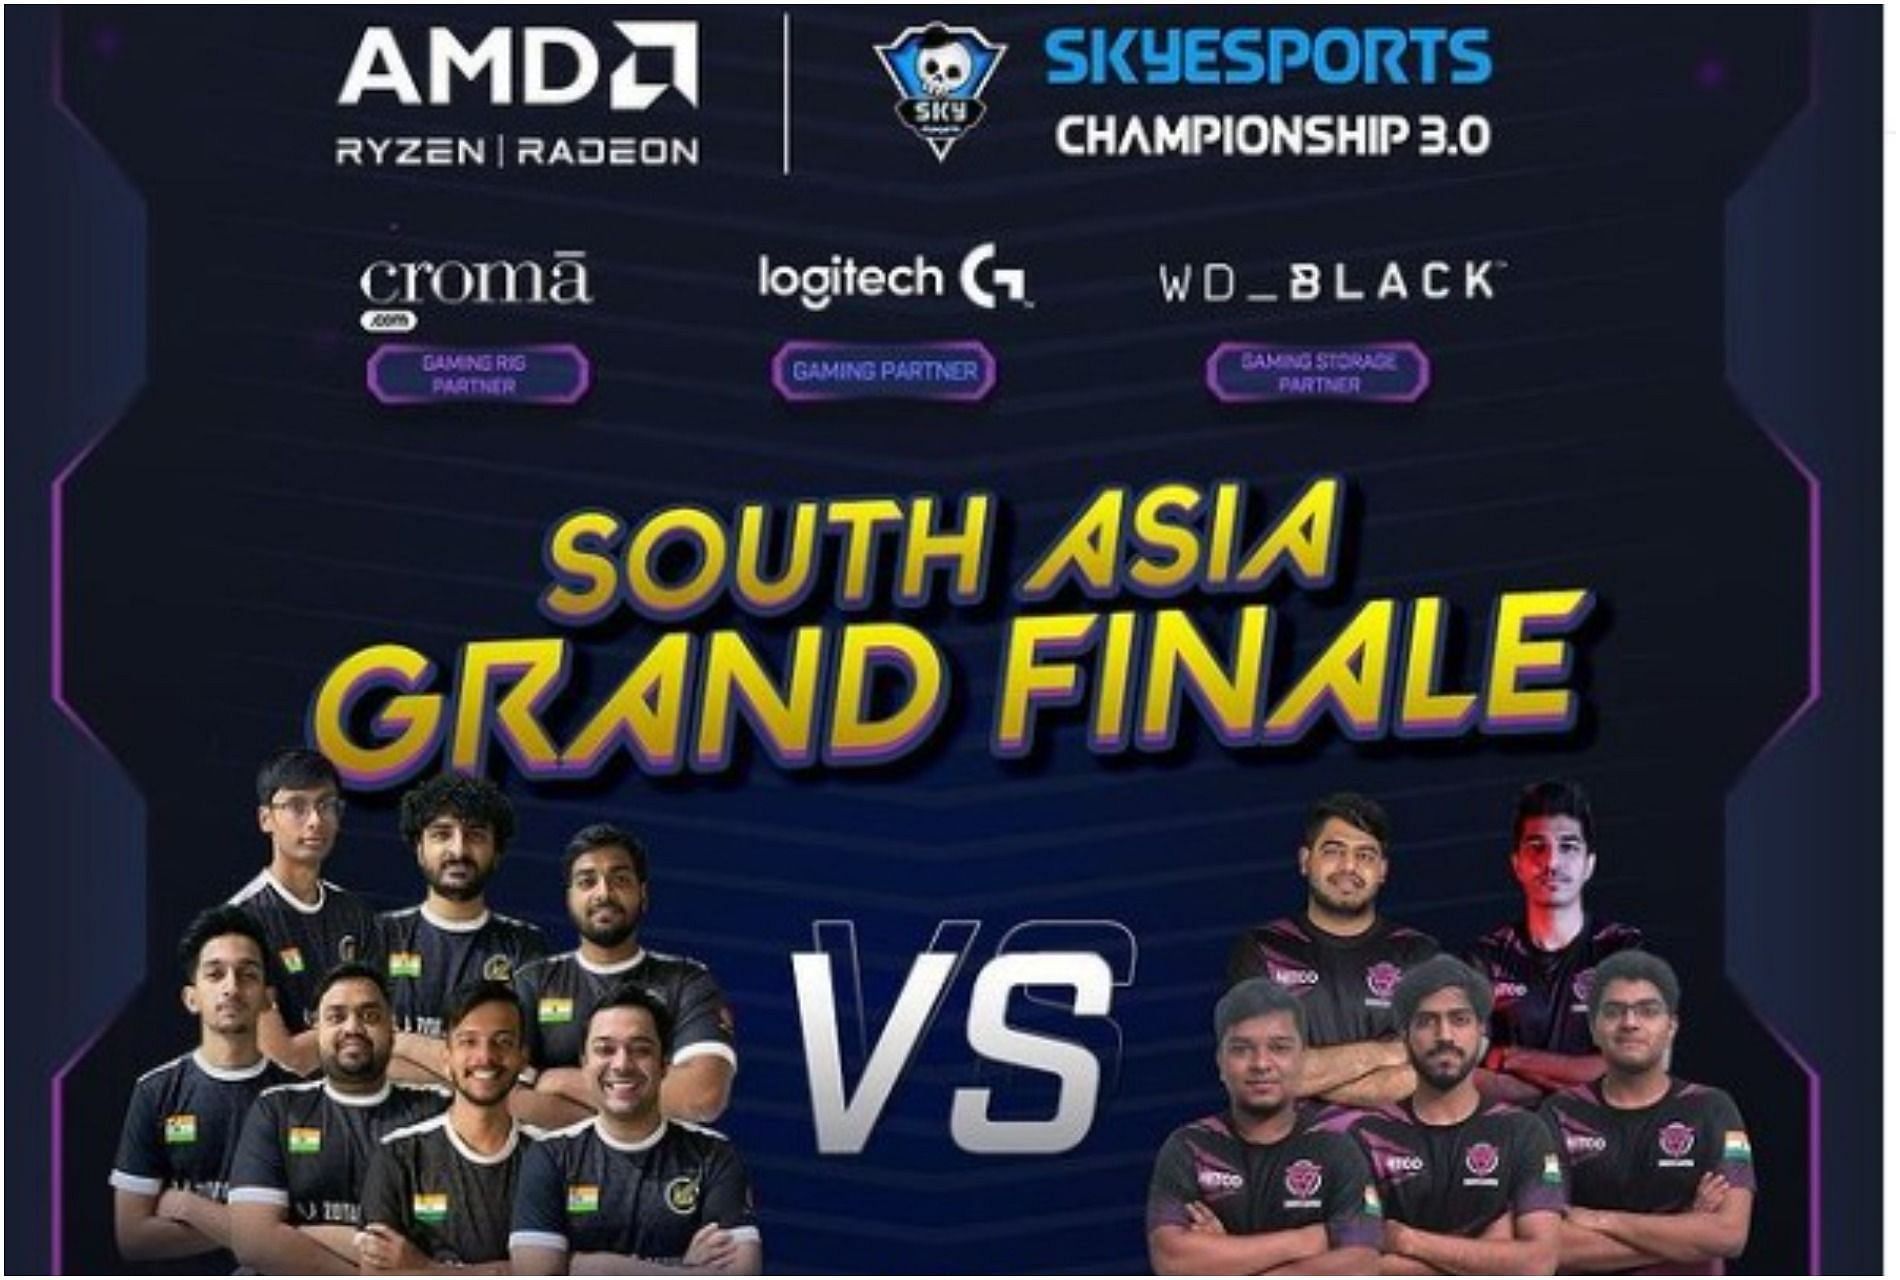 Velocity Gaming vs Enigma Gaming in the Skyesports Valorant Championship 3.0 South-Asia Grand Finals (Image via skyesportsgaming/Instagram)